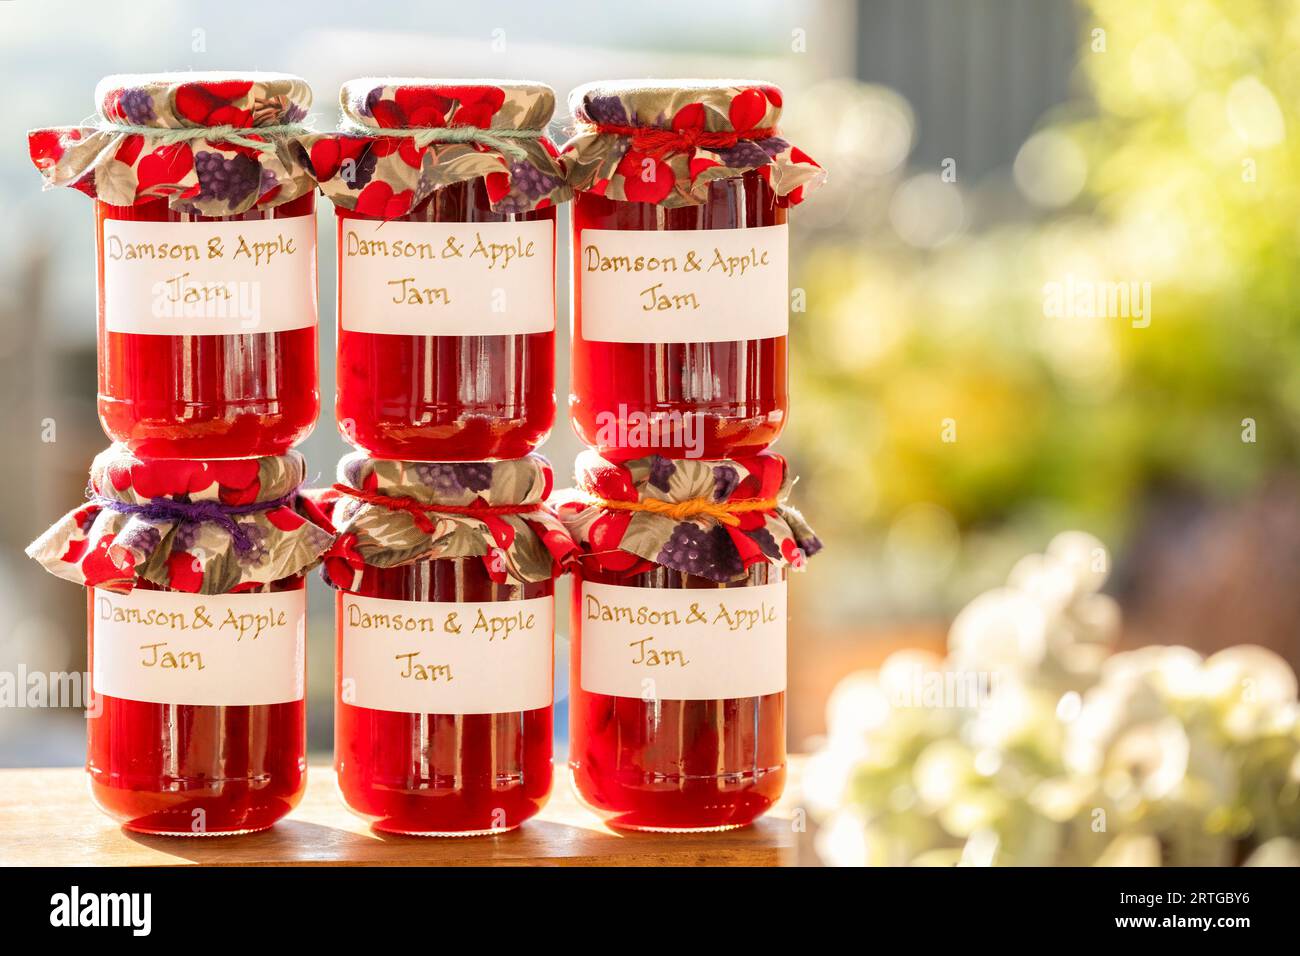 Jars of homemade Damson and Apple jam. The glass jars have clear handwritten labels and each jar has a cloth topping. Stock Photo